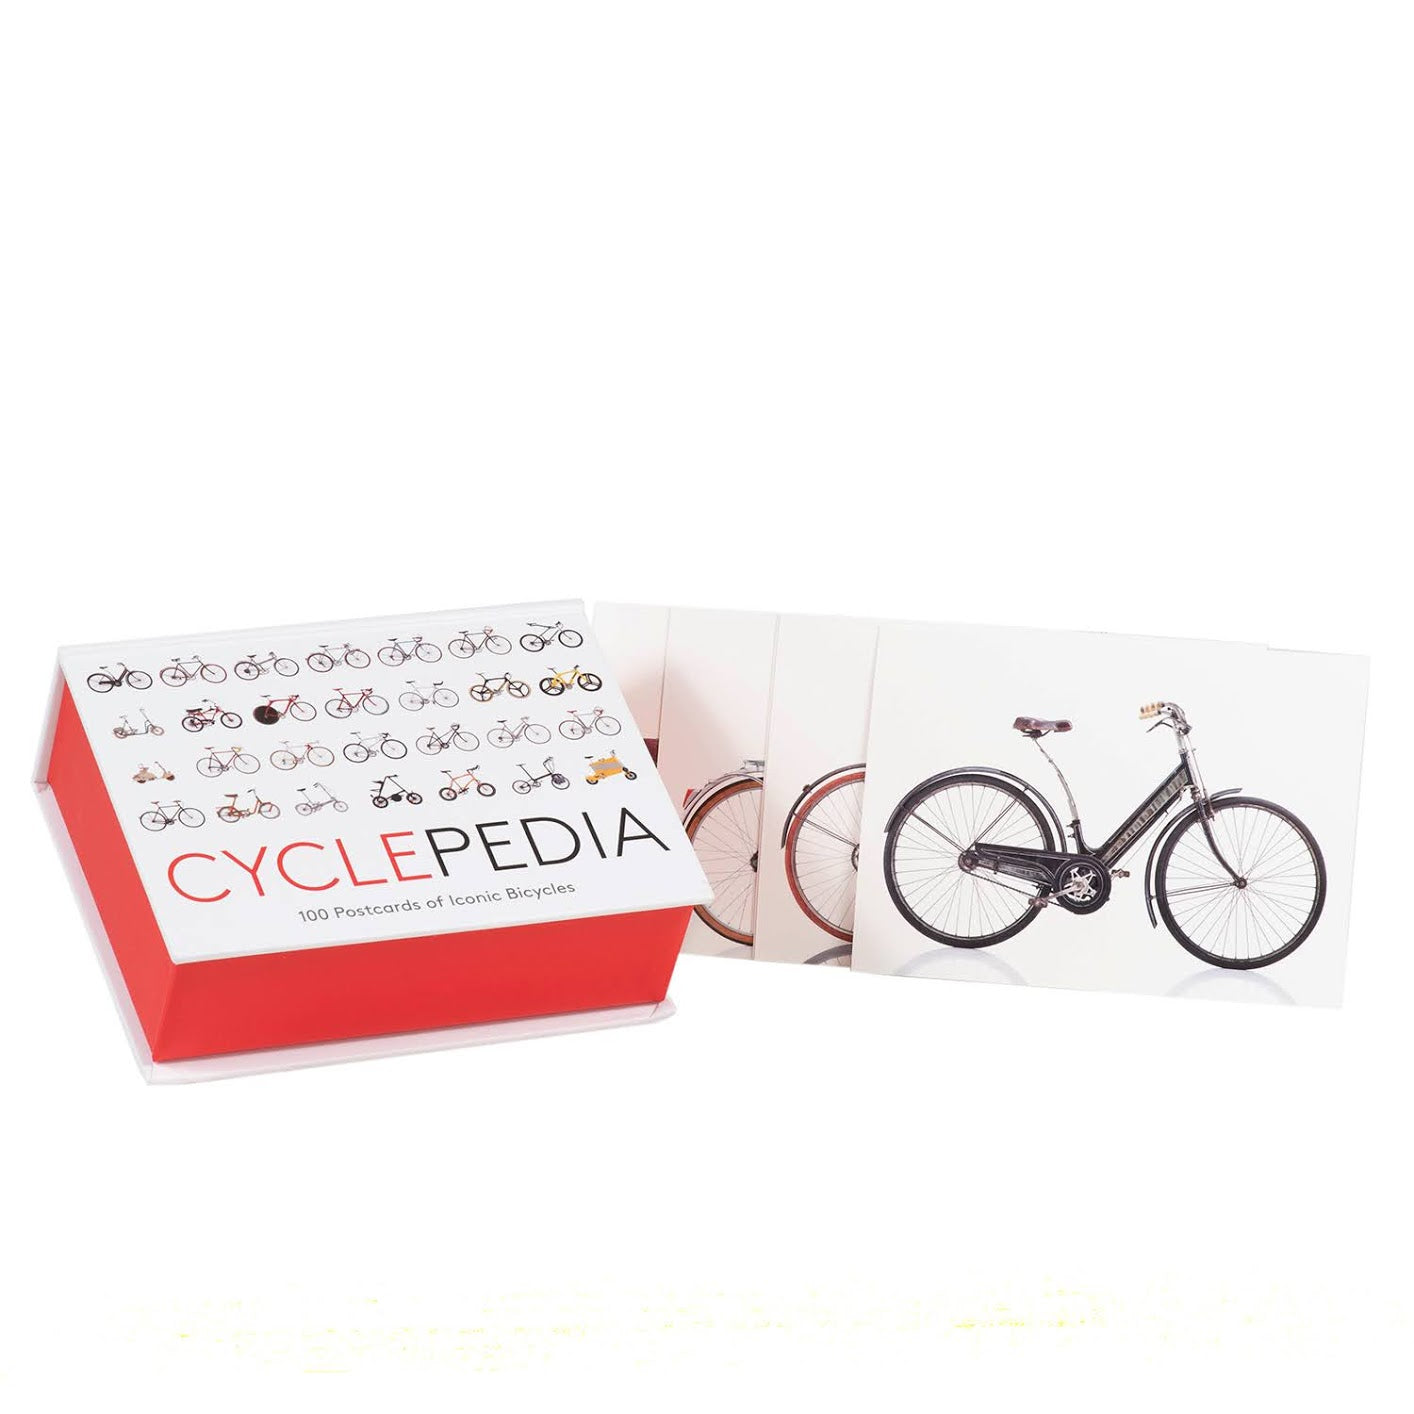 CIRCLES BOOKS Cyclepedia: 100 Postcards of Iconic Bicycles